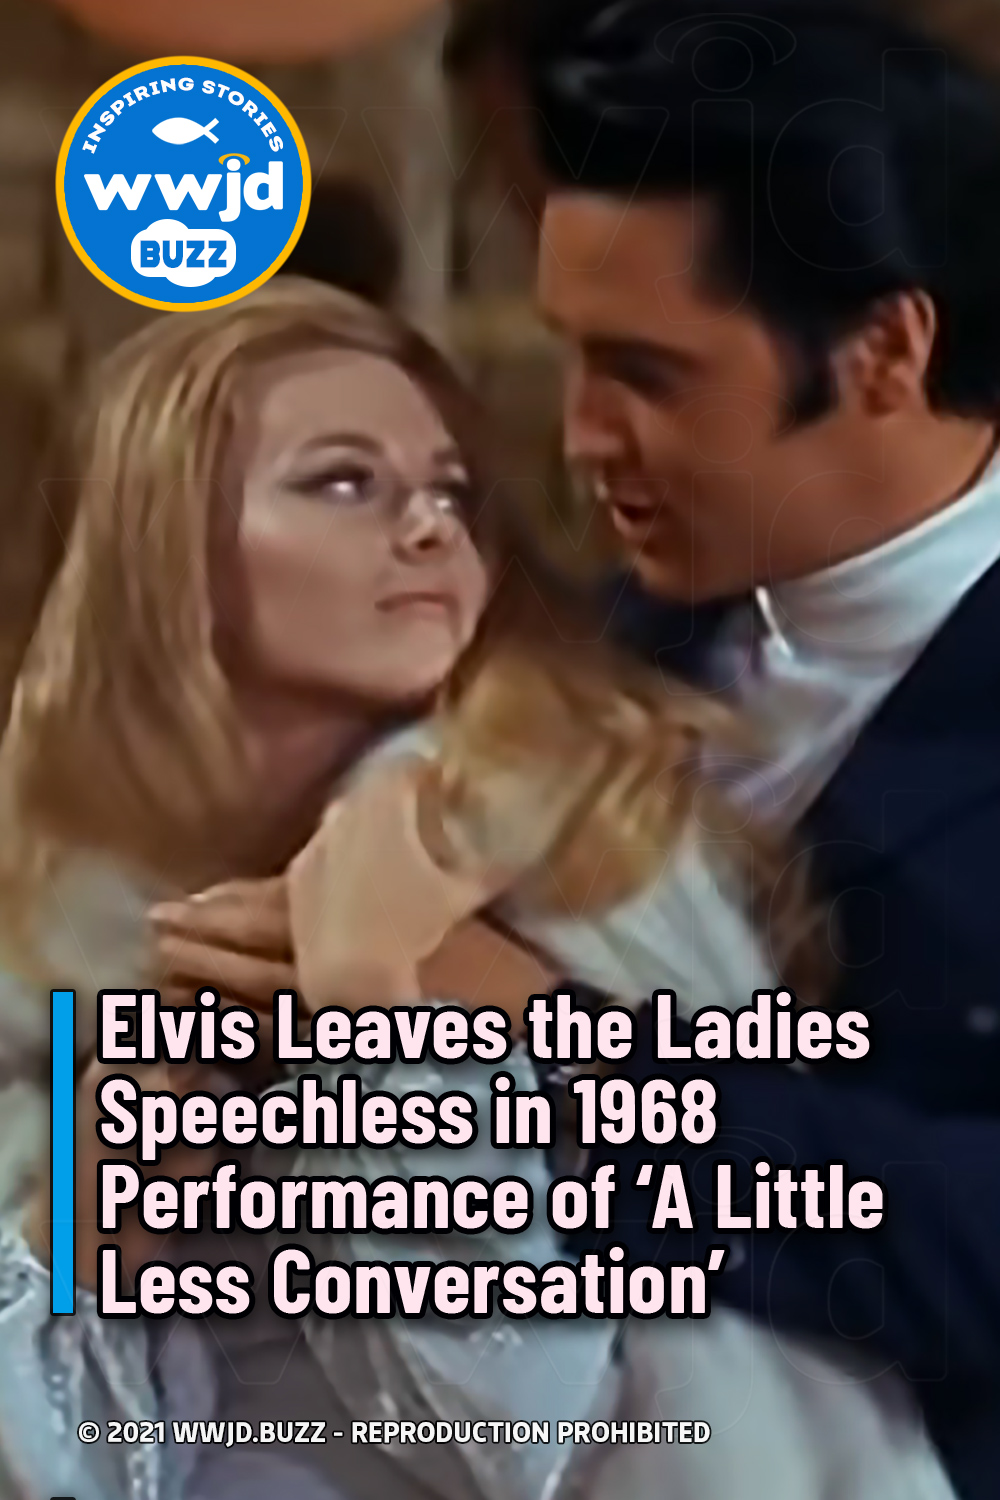 Elvis Leaves the Ladies Speechless in 1968 Performance of ‘A Little Less Conversation’